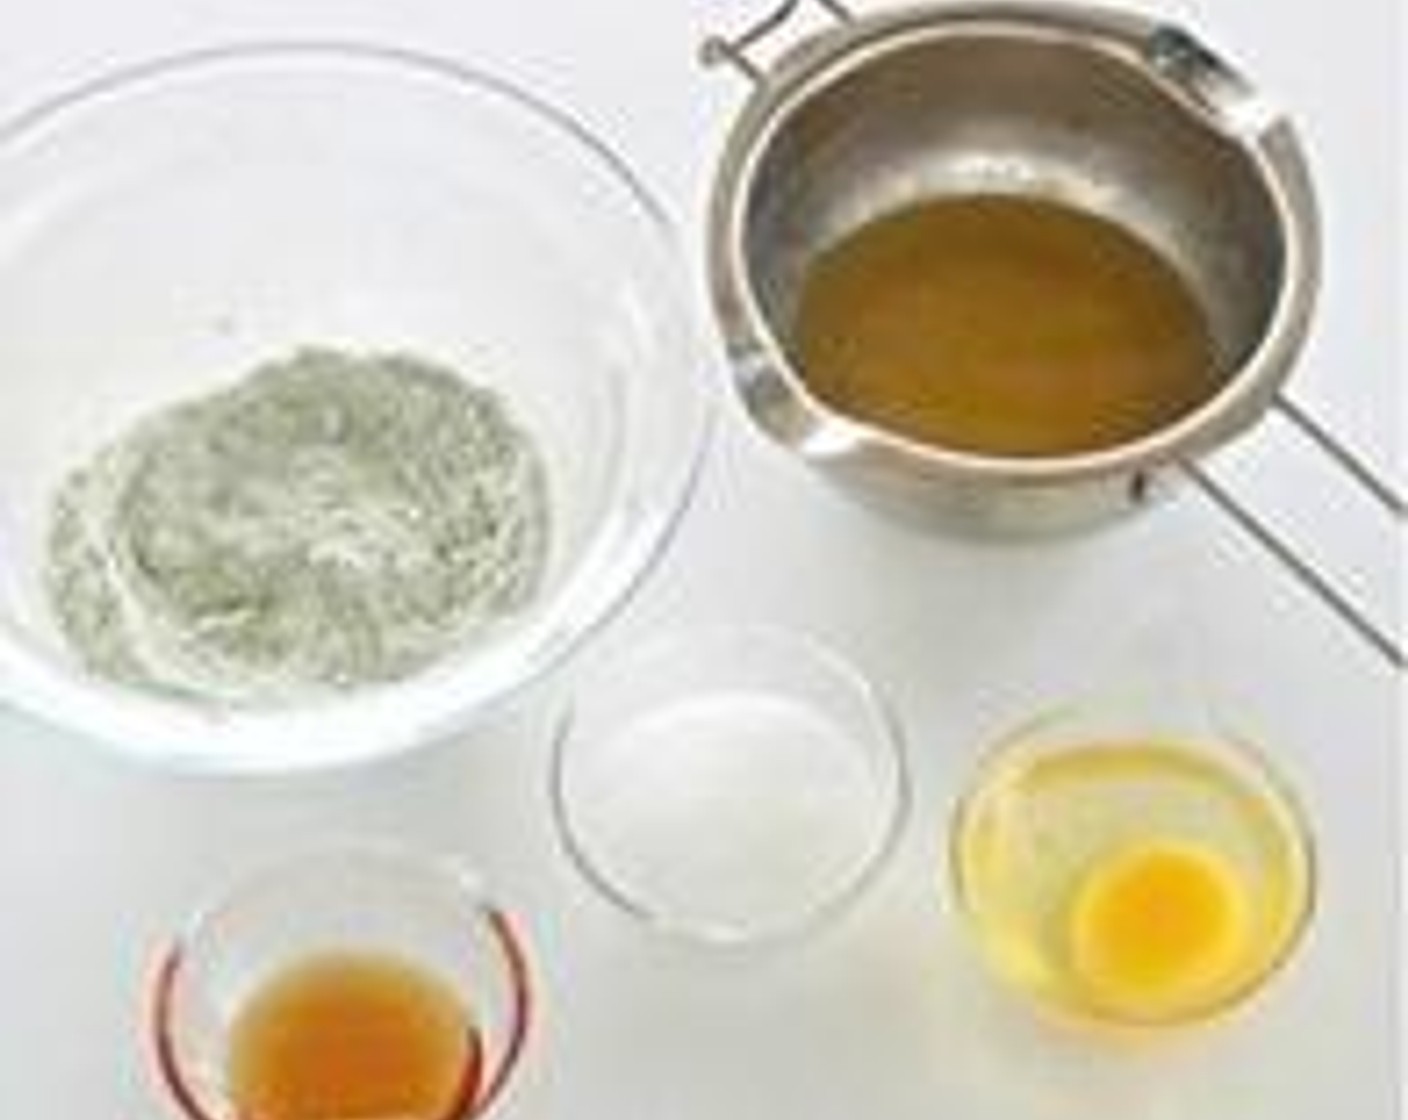 step 1 Sift Cake Flour (1/4 cup), Matcha Powder (1 tsp) and Baking Powder (1/4 tsp) together and set aside.